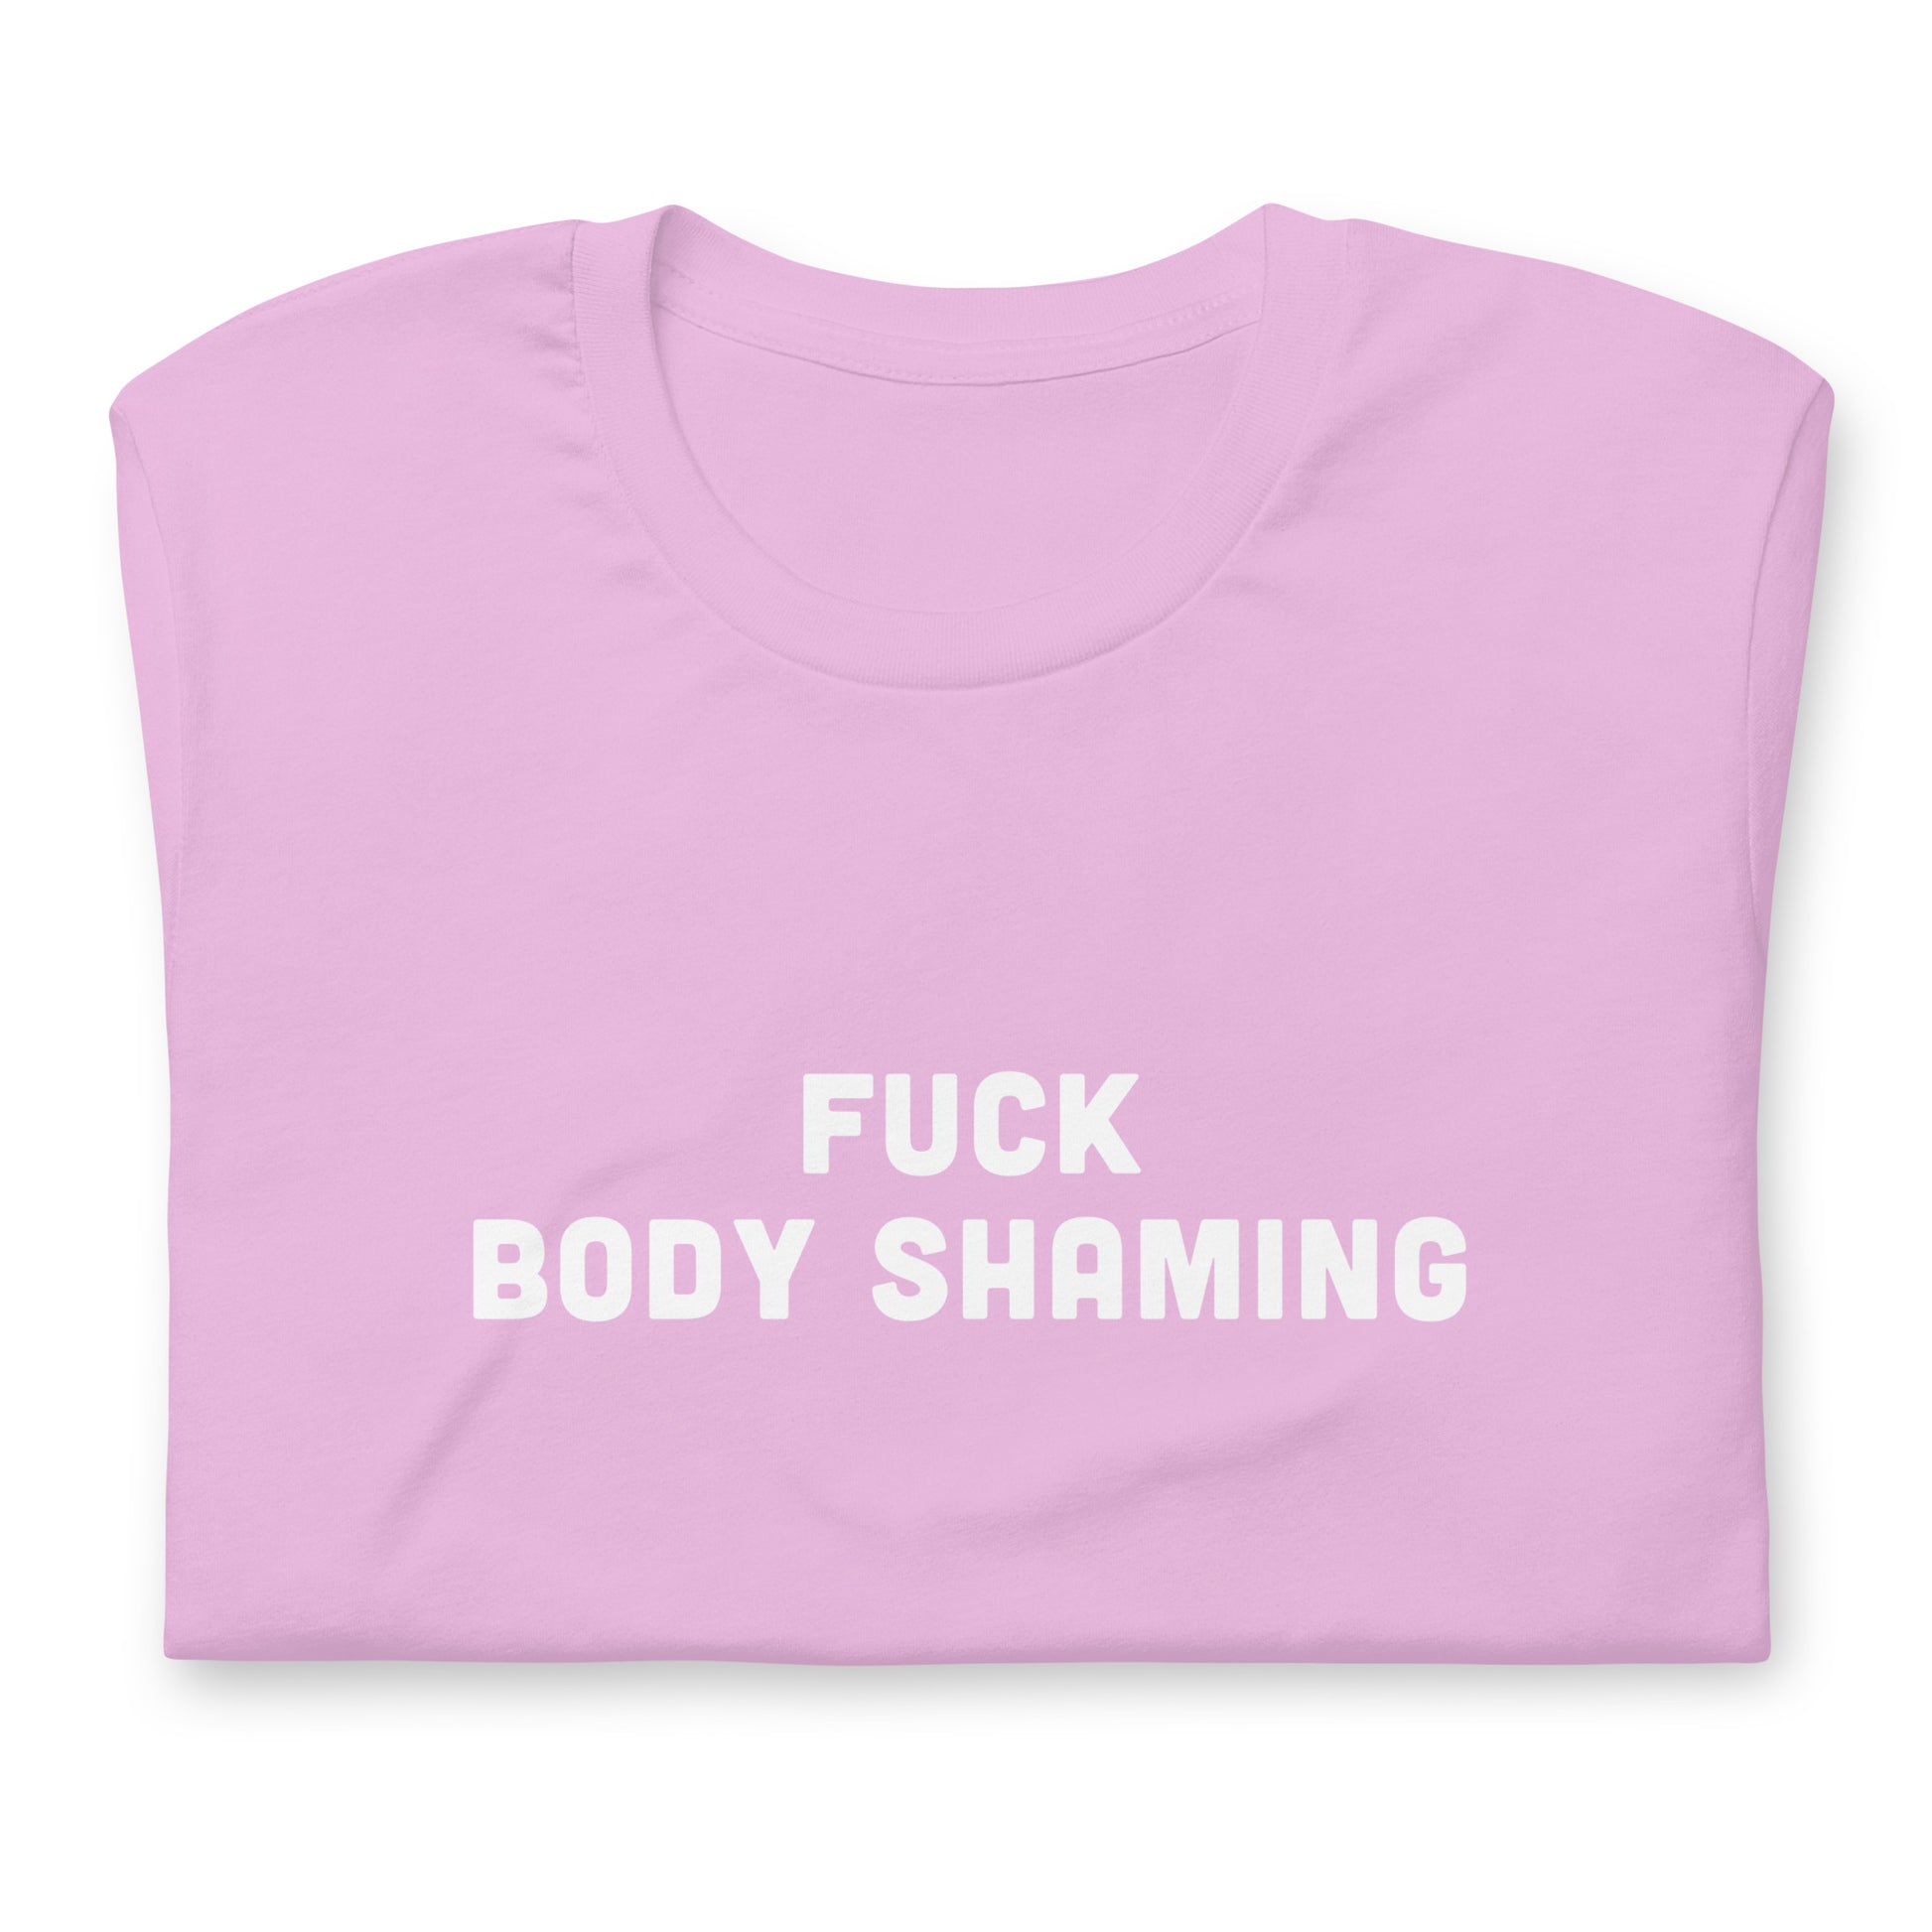 Fuck Body Shaming T-shirt Size XL Color Forest